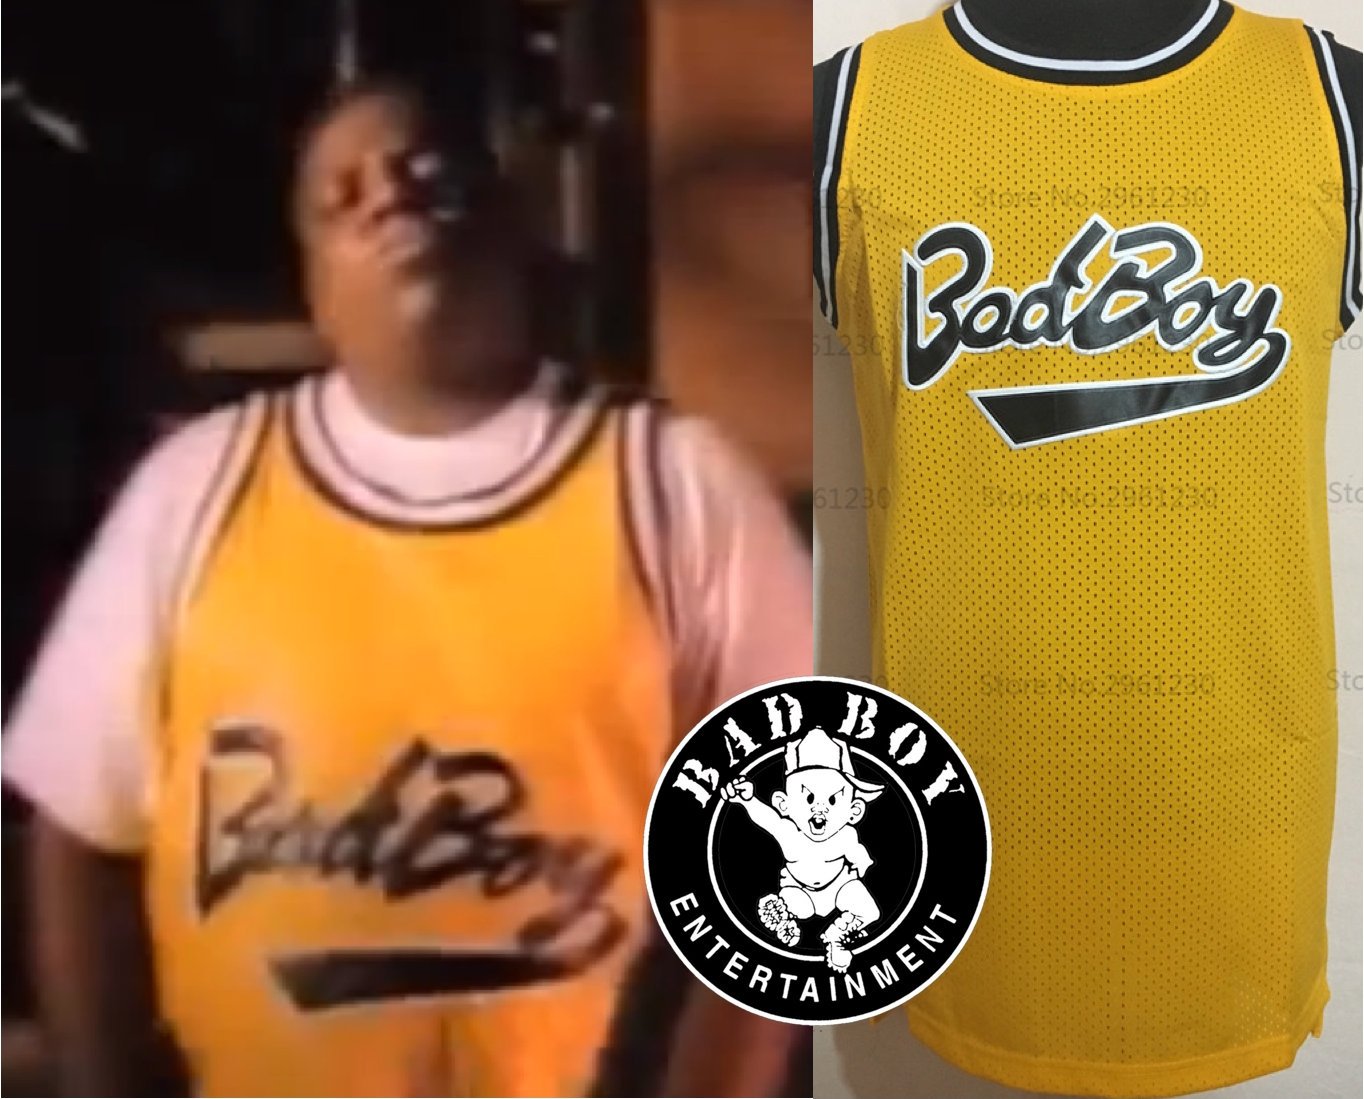 Notorious B.I.G.'s 'Juicy' Video Jersey Featured on Hip Hop Treasures